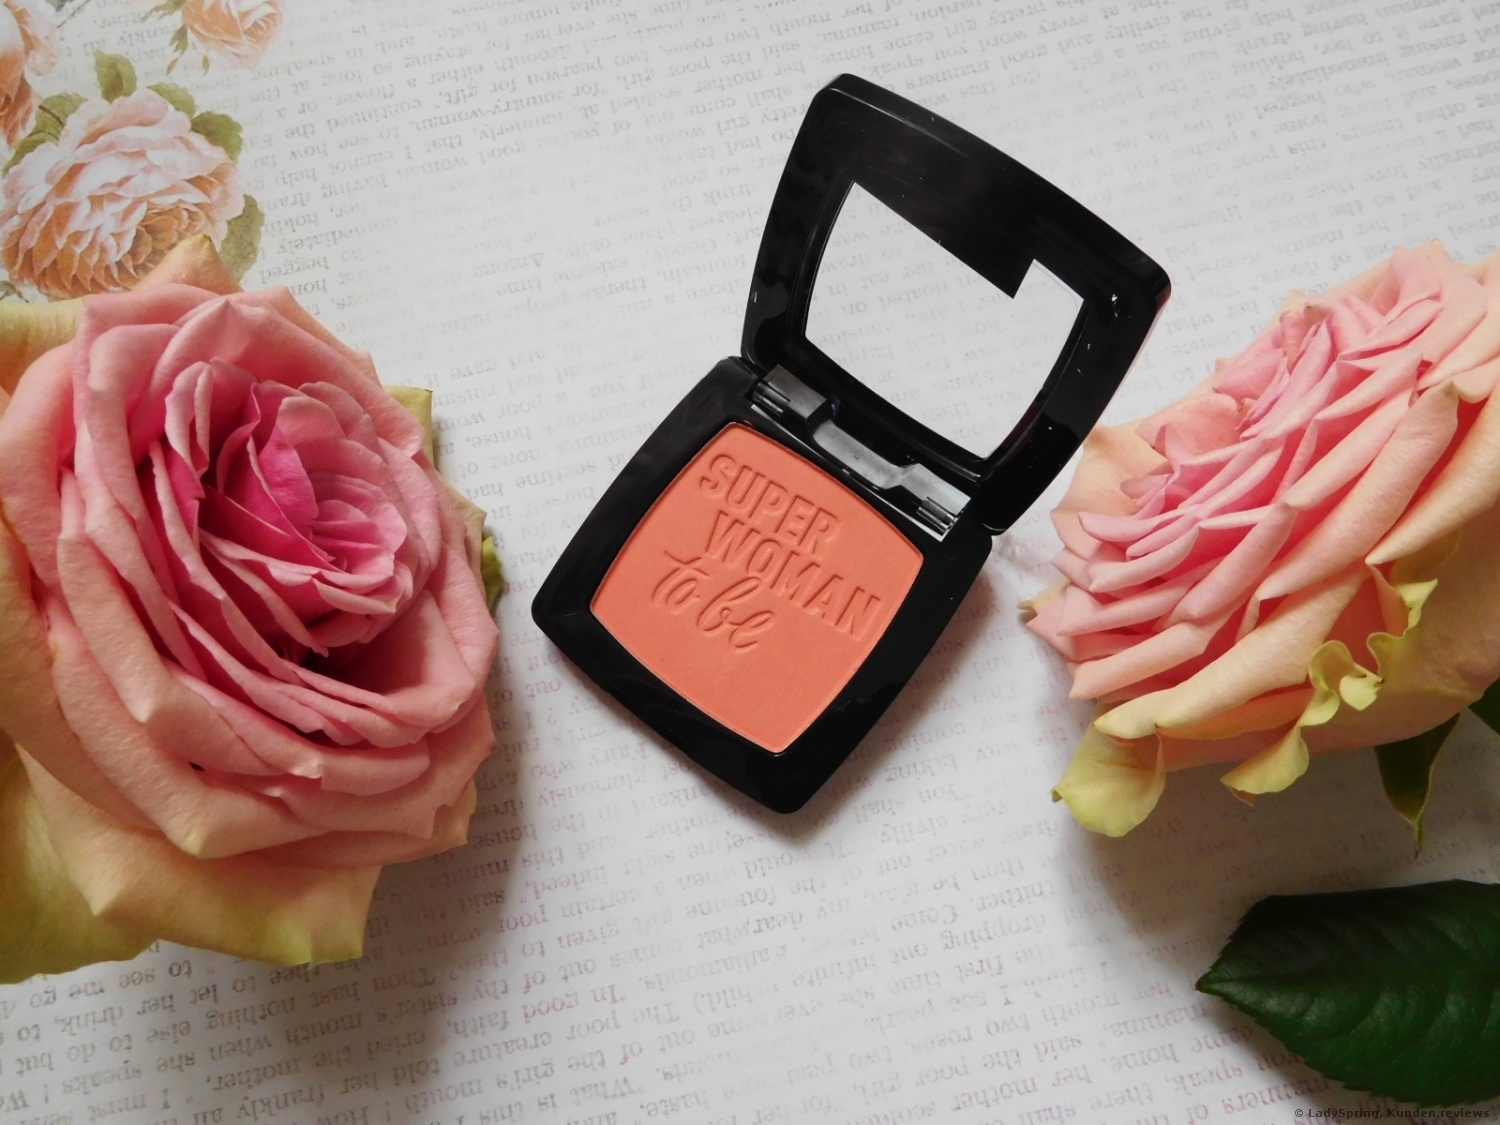 Catrice Blush Box 030 Golden Coral